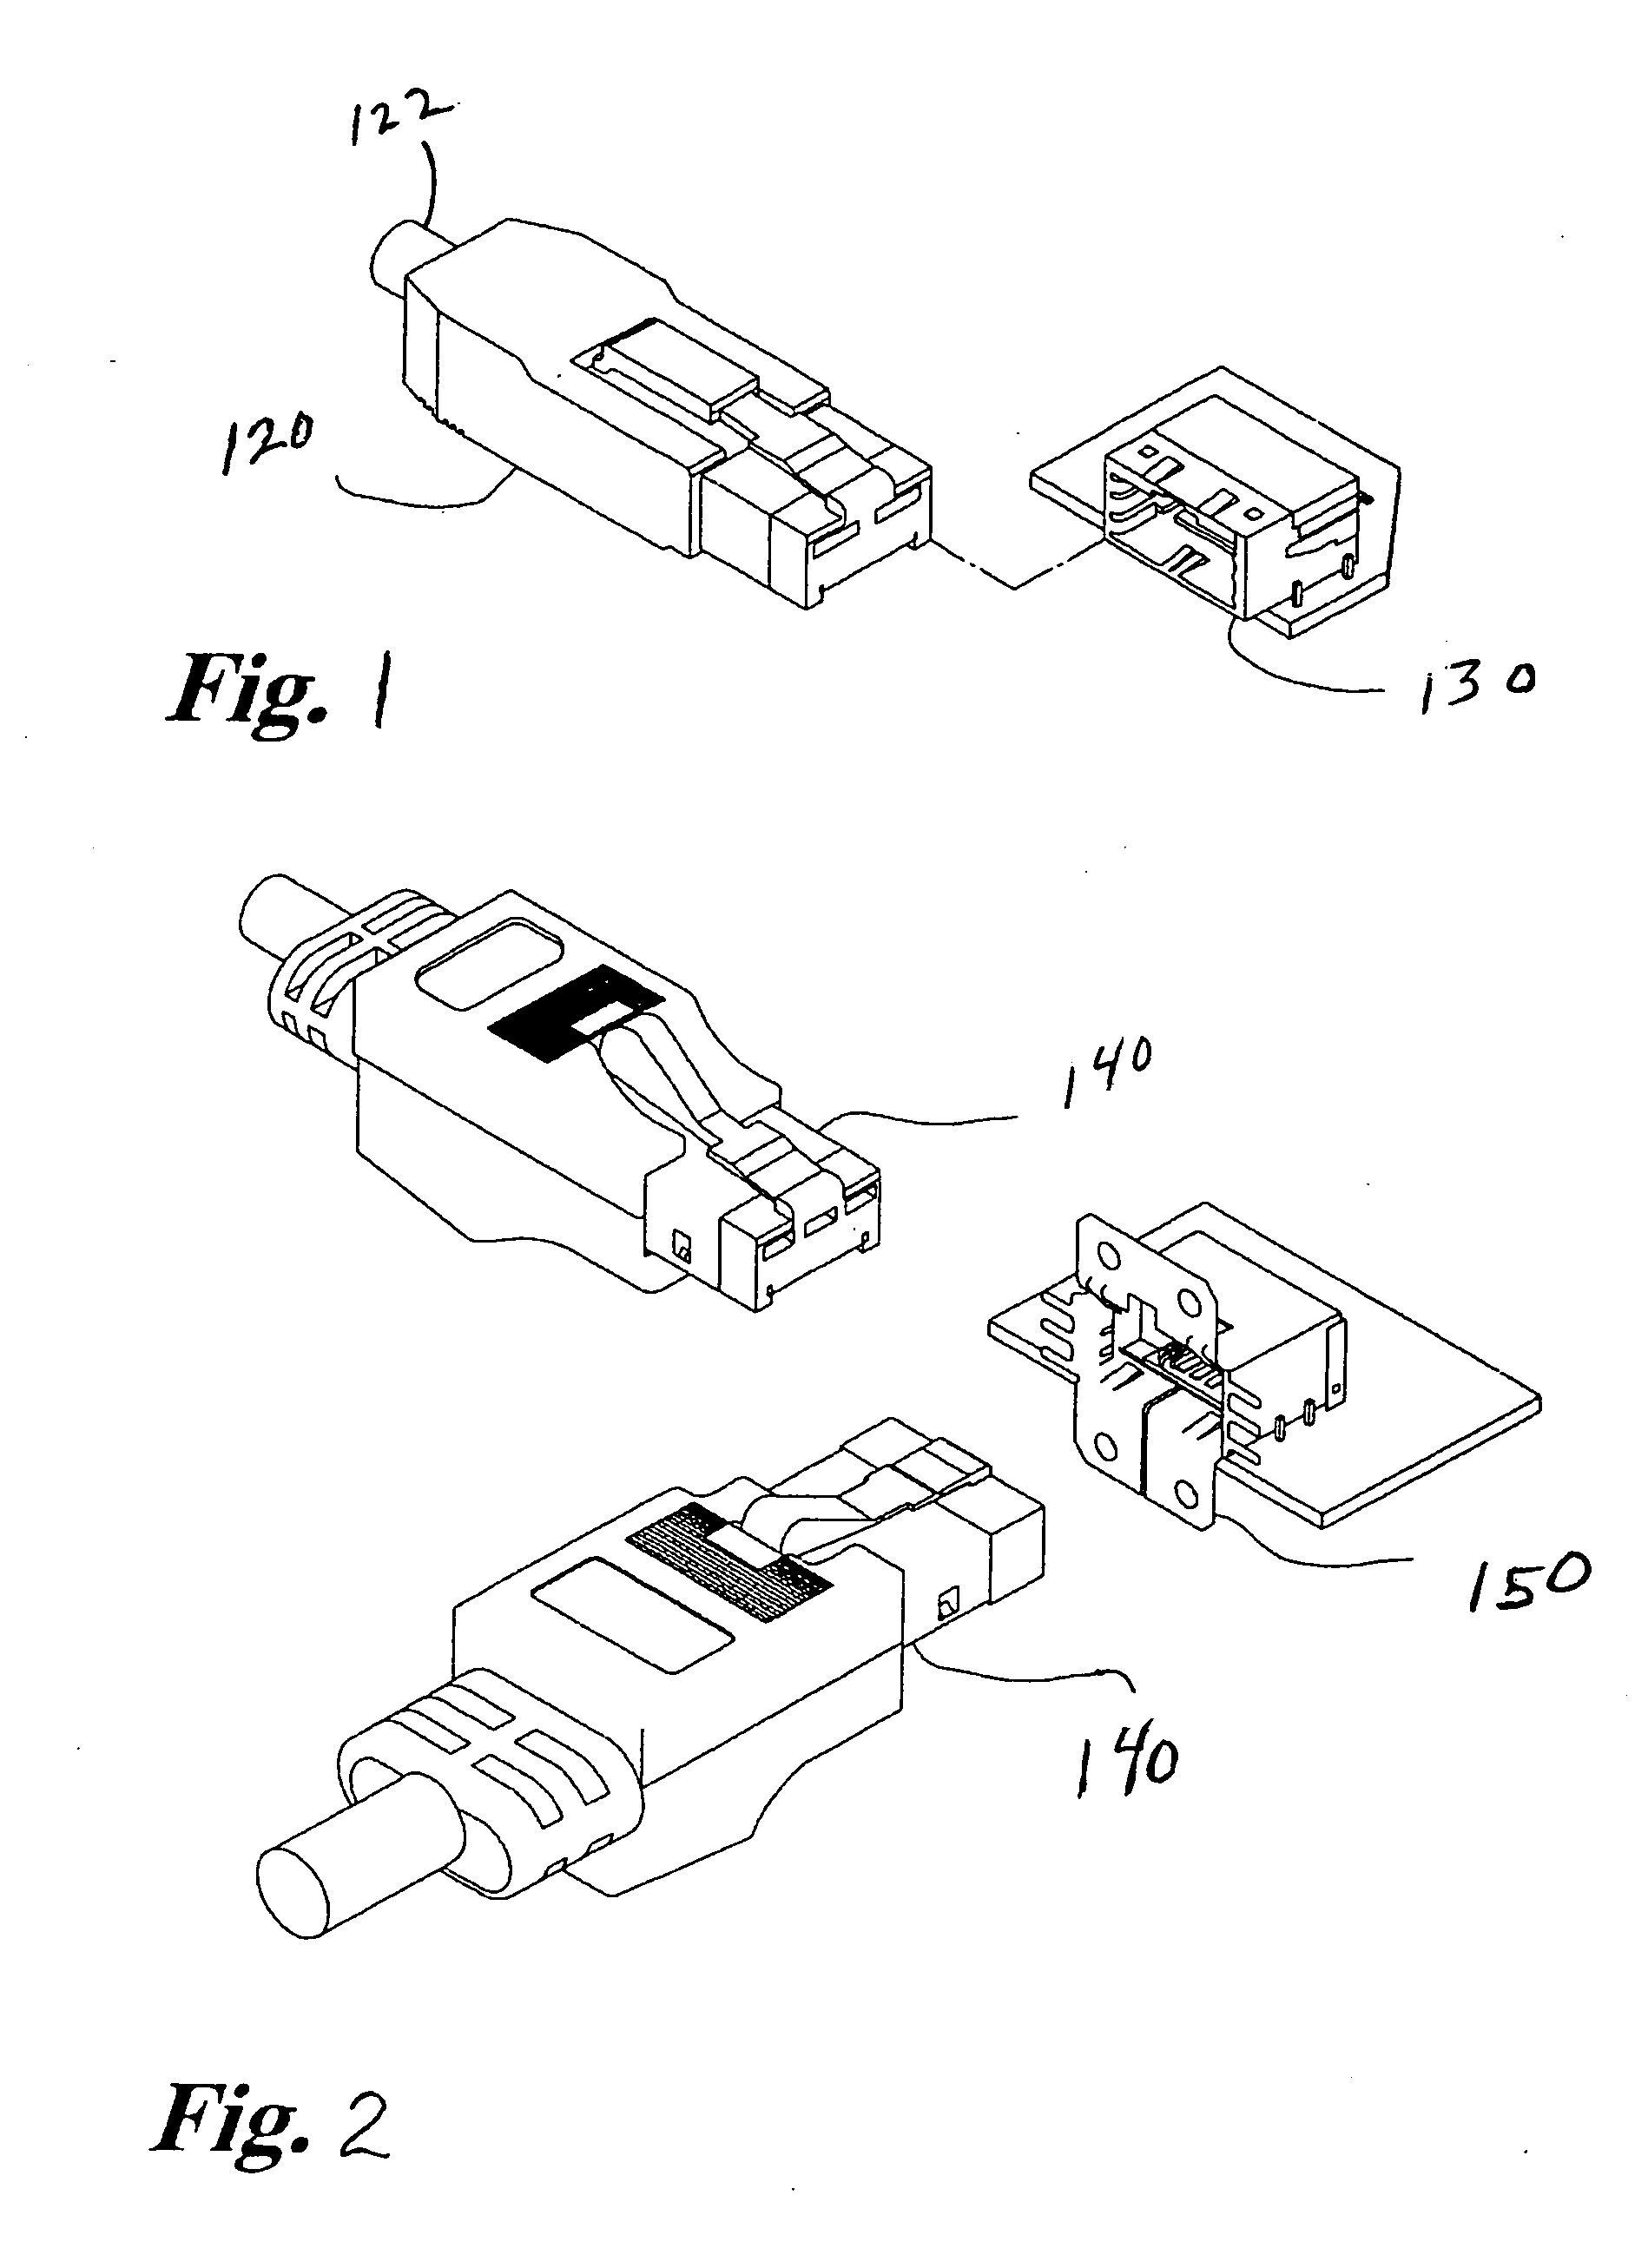 Radio frequency identification of a connector by a patch panel or other similar structure